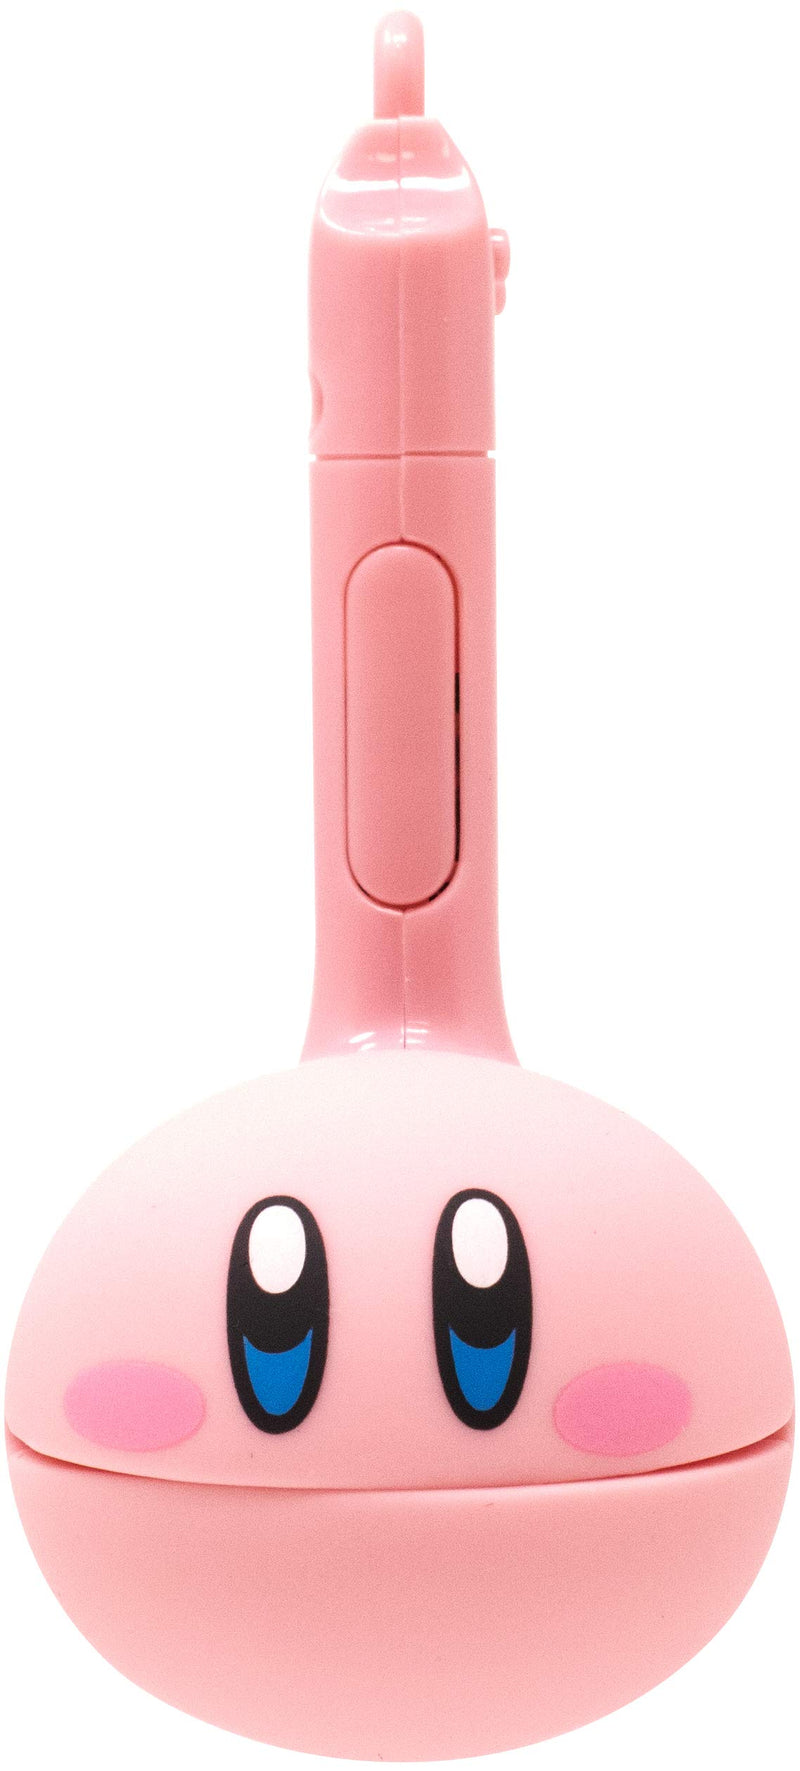 Otamatone"Melody" Special Edition [Kirby] Electronic Musical Instrument Portable Synthesizer from Japan (English Version) Kirby Melody [English Edition]